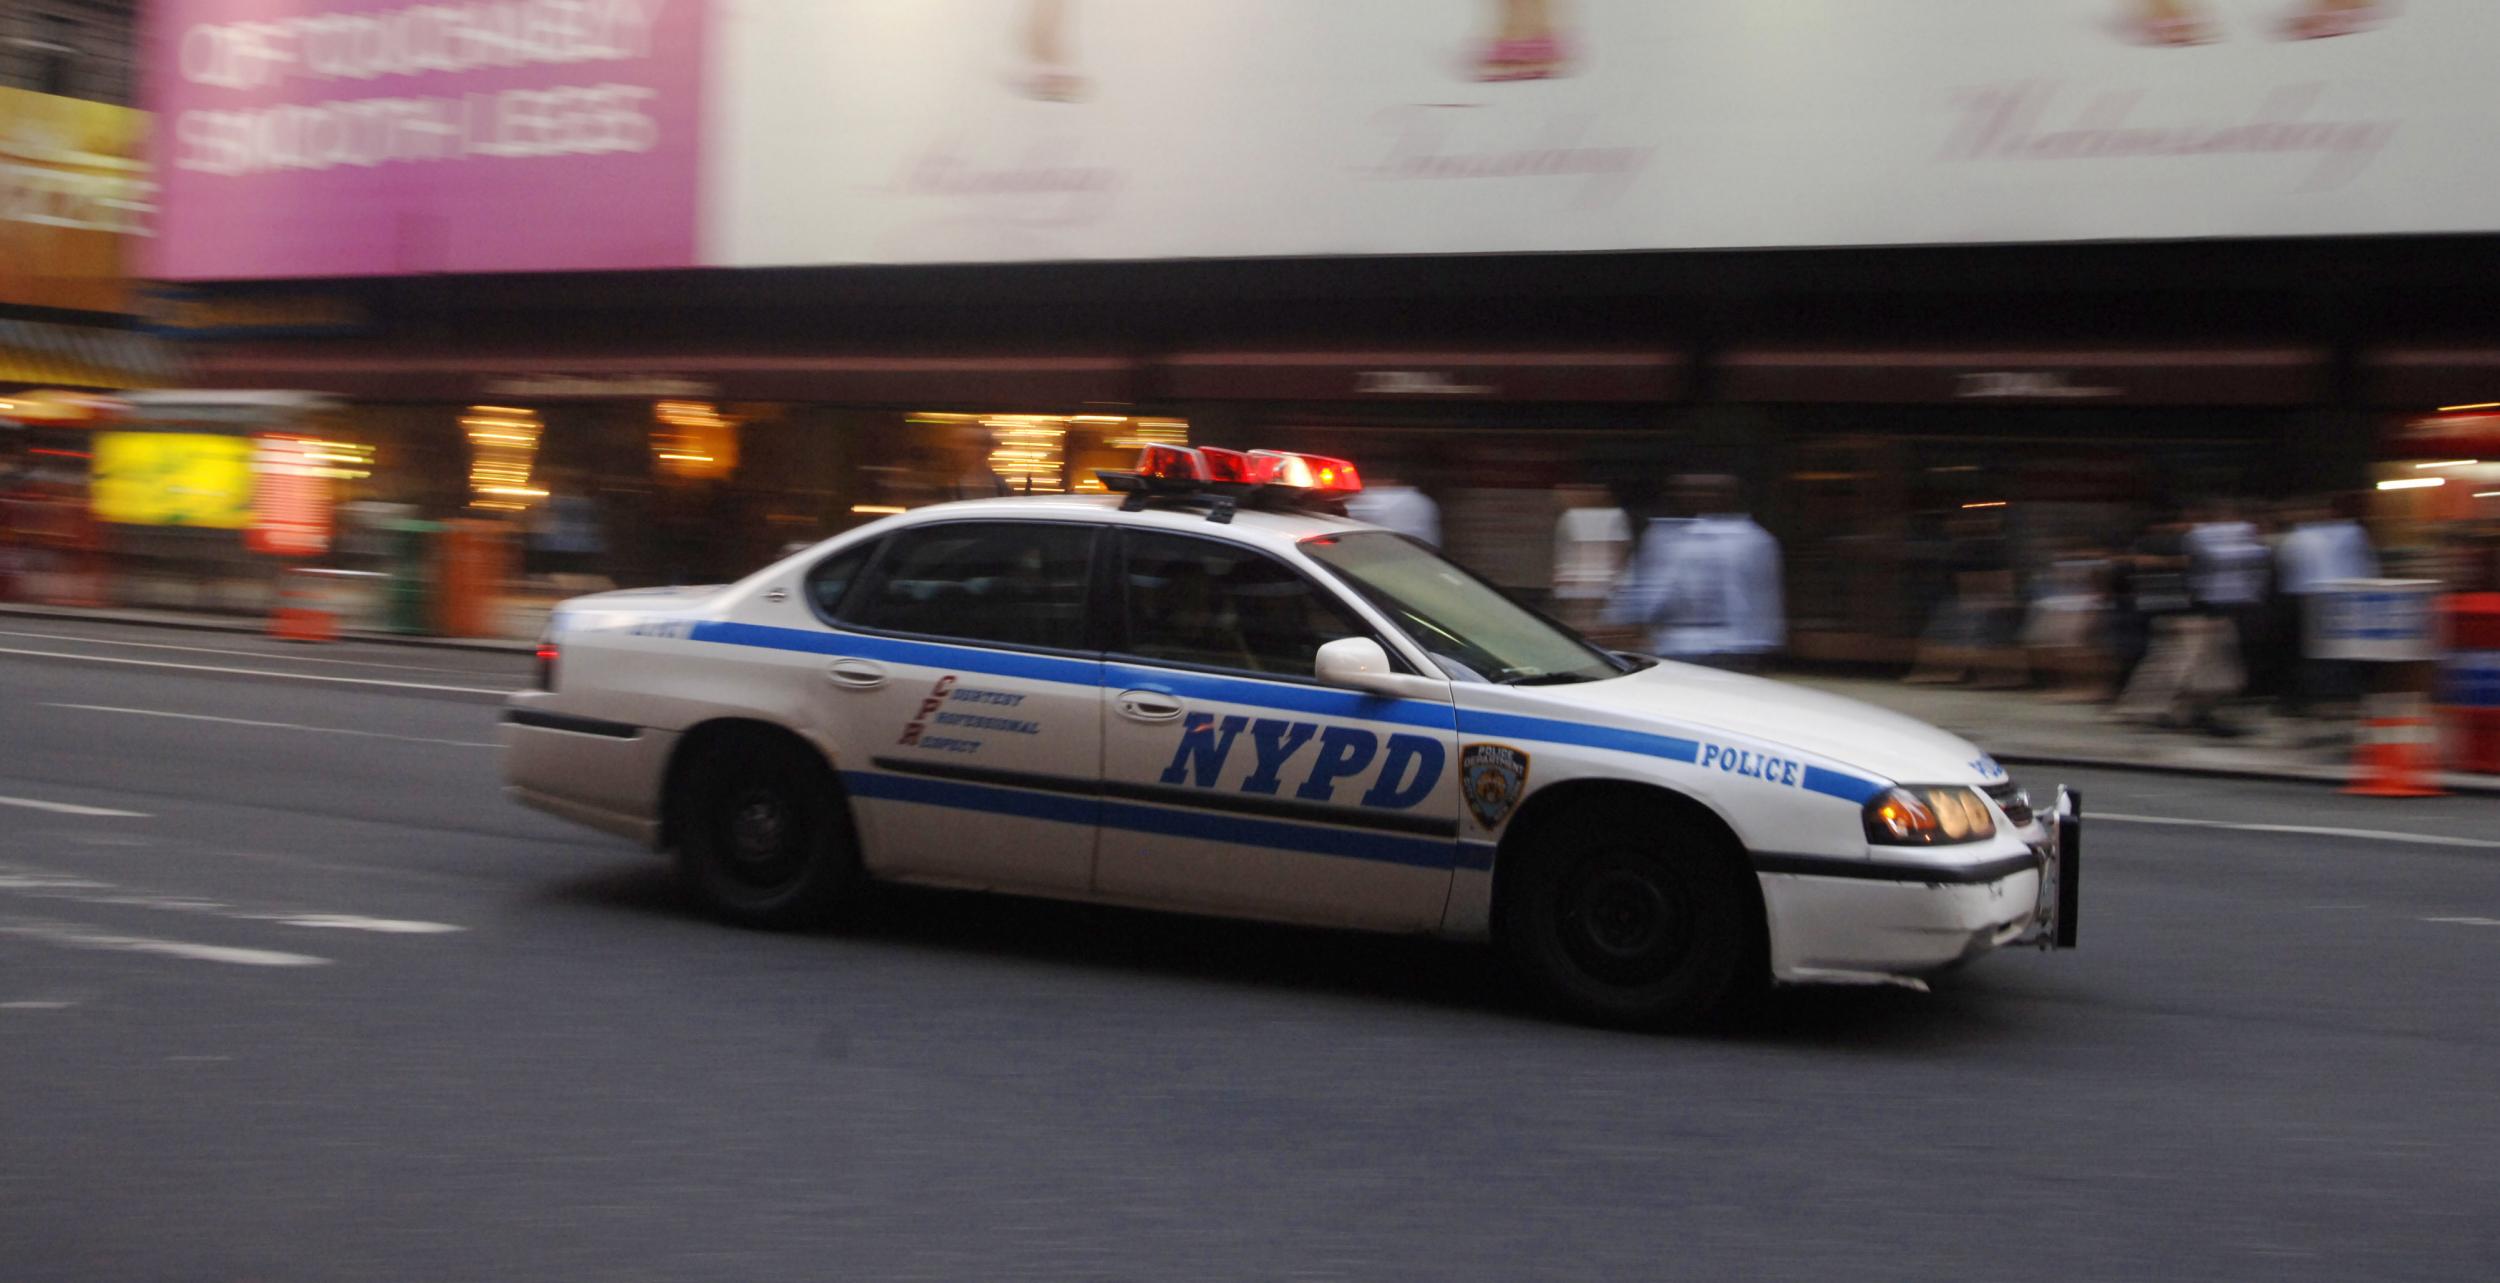 Two NYPD officers have been charged with rape